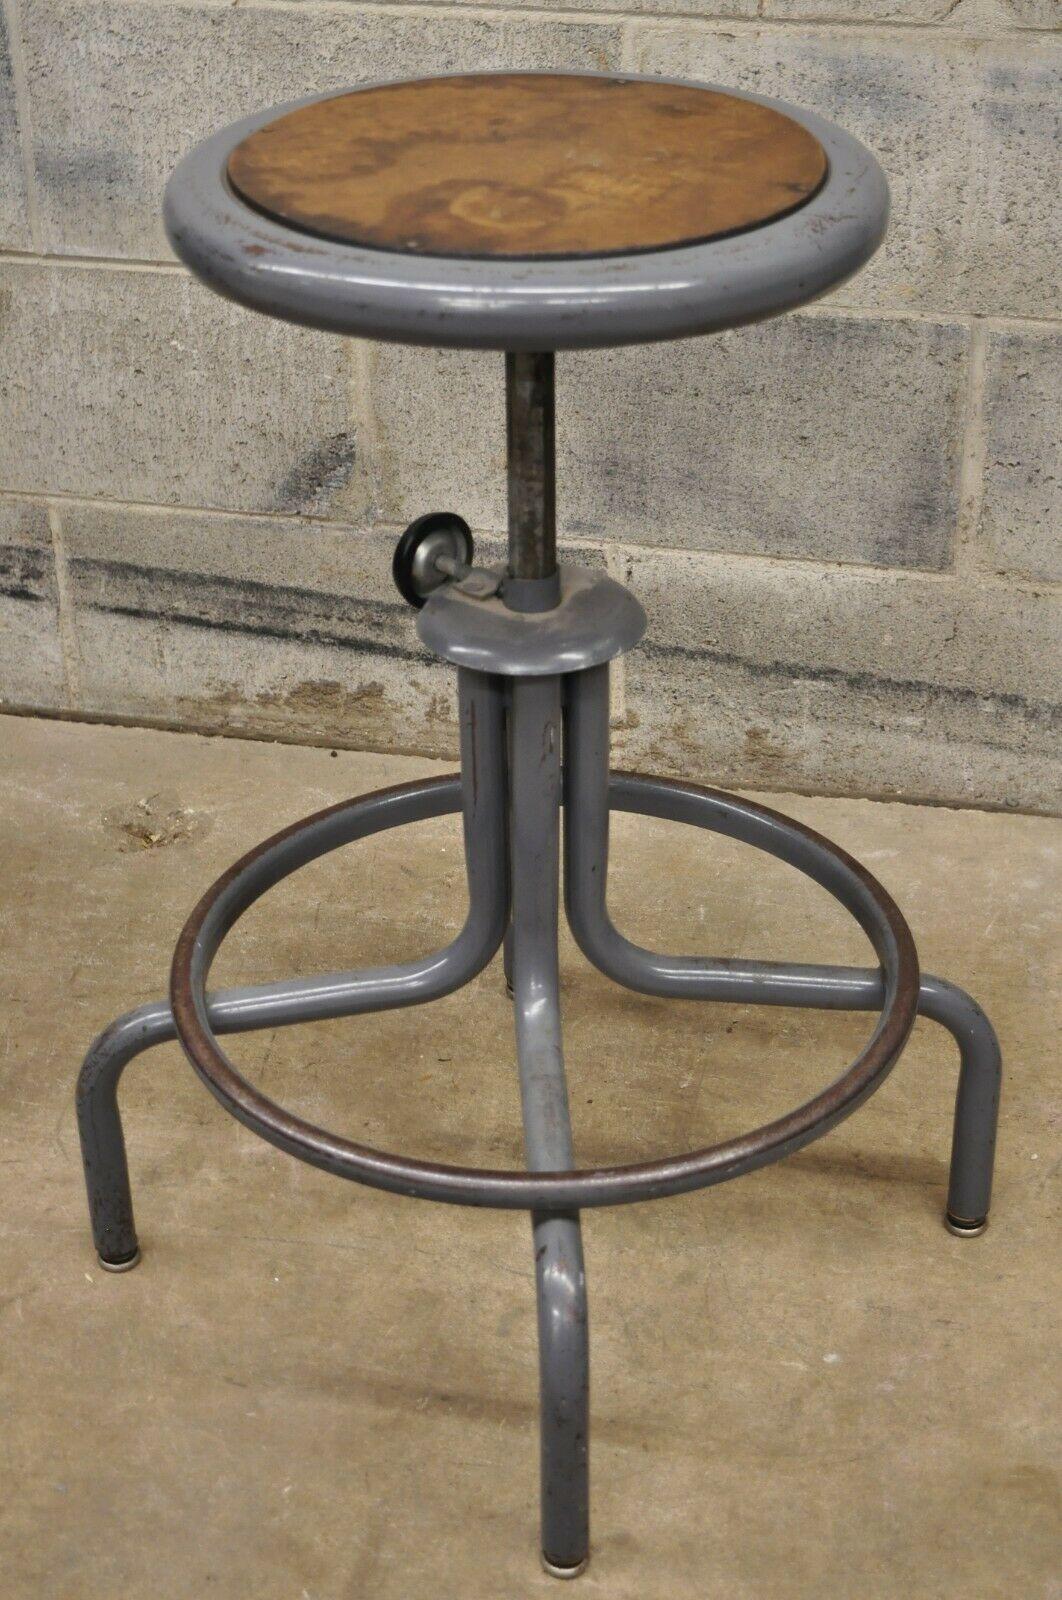 Vintage inter royal corp grey metal adjustable swivel work stool seat. Item features adjustable height, swivel seat, original label, quality American craftsmanship. Circa mid to late 20th century. Measurements: 22-27